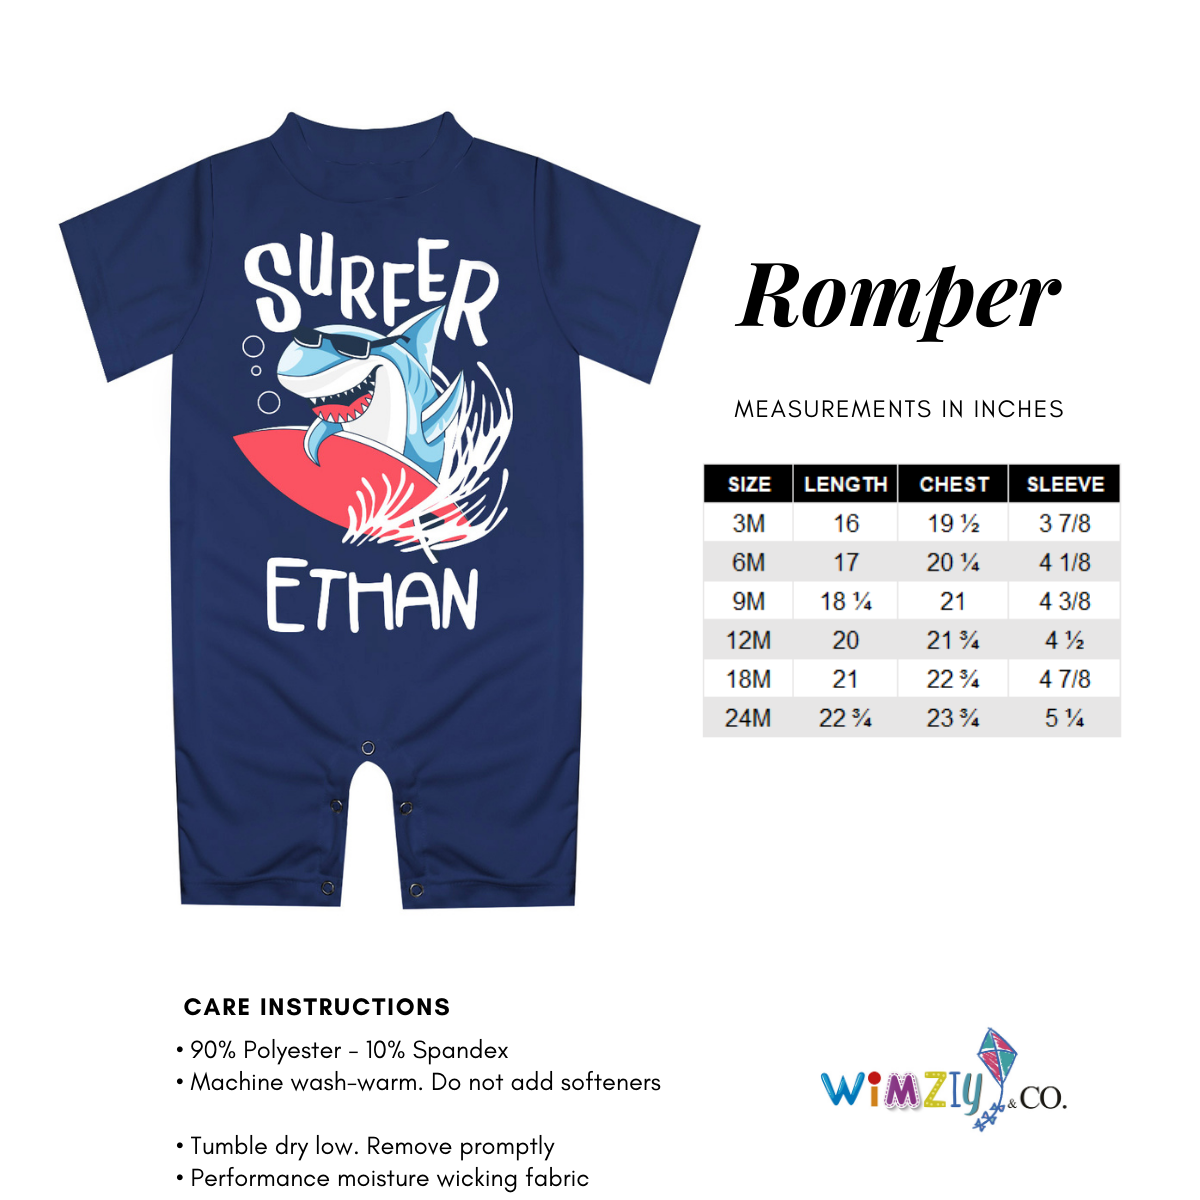 Monogram Stripe Navy and Red Boys Romper - Wimziy&Co.